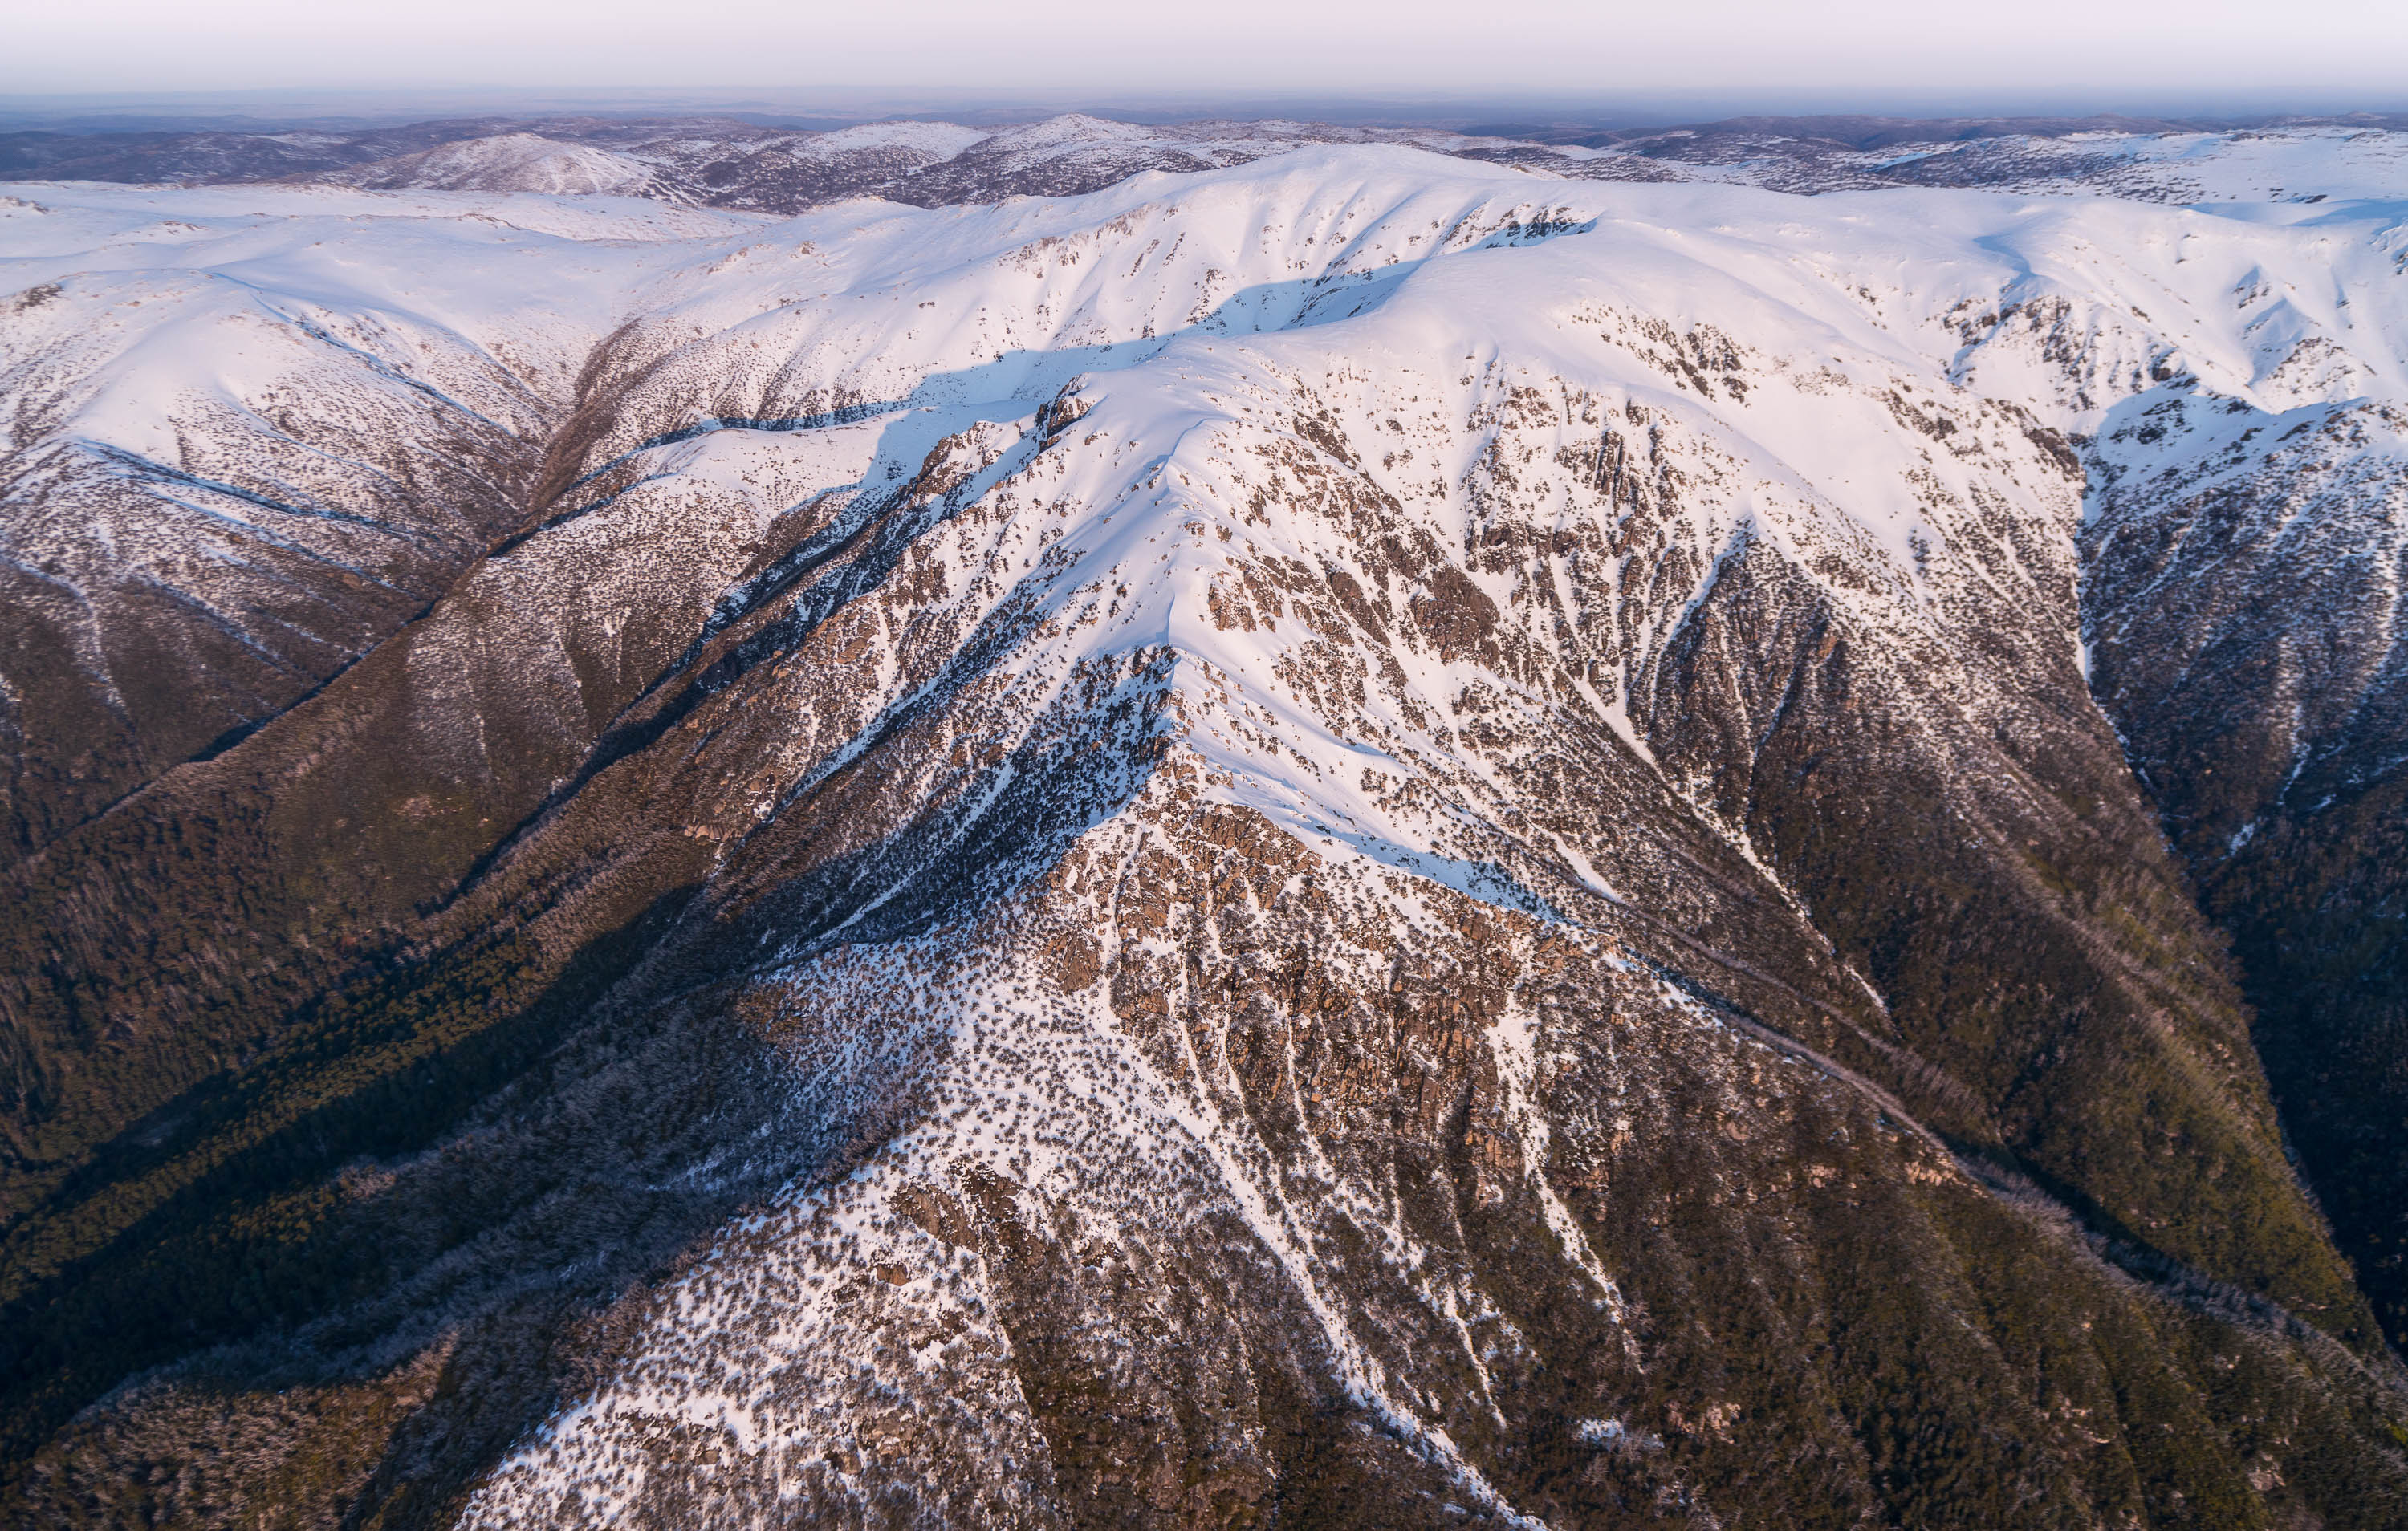 Large mountain walls with massive cracks and waves, Late Afternoon Light on the Western Face of the Snowy Mountains, New South Wales